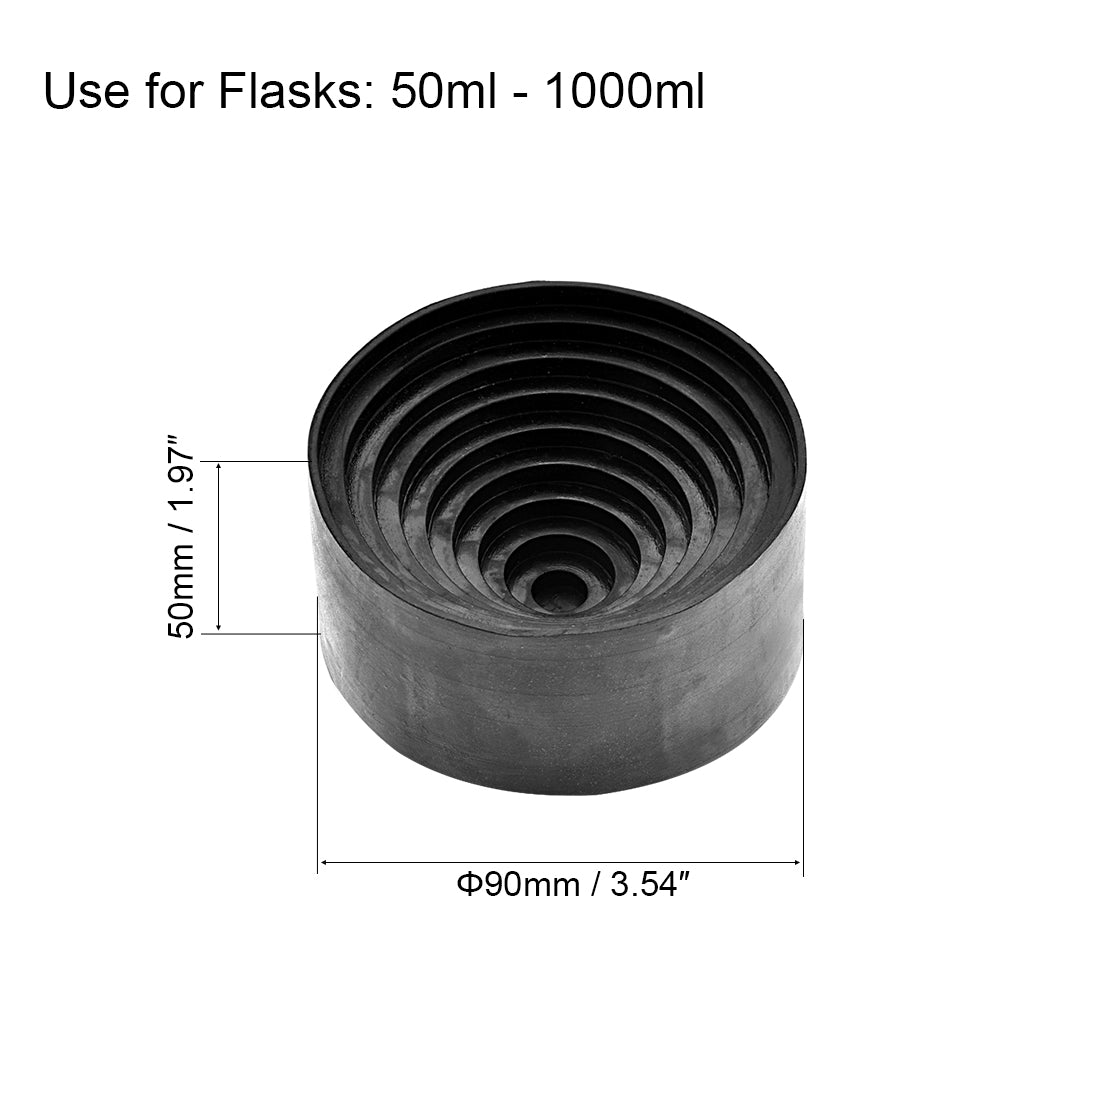 uxcell Uxcell Lab Flask Support Rubber Stand 90mm Diameter Round Bottom Holder for 50ml-1000ml Flasks Black 3Pcs